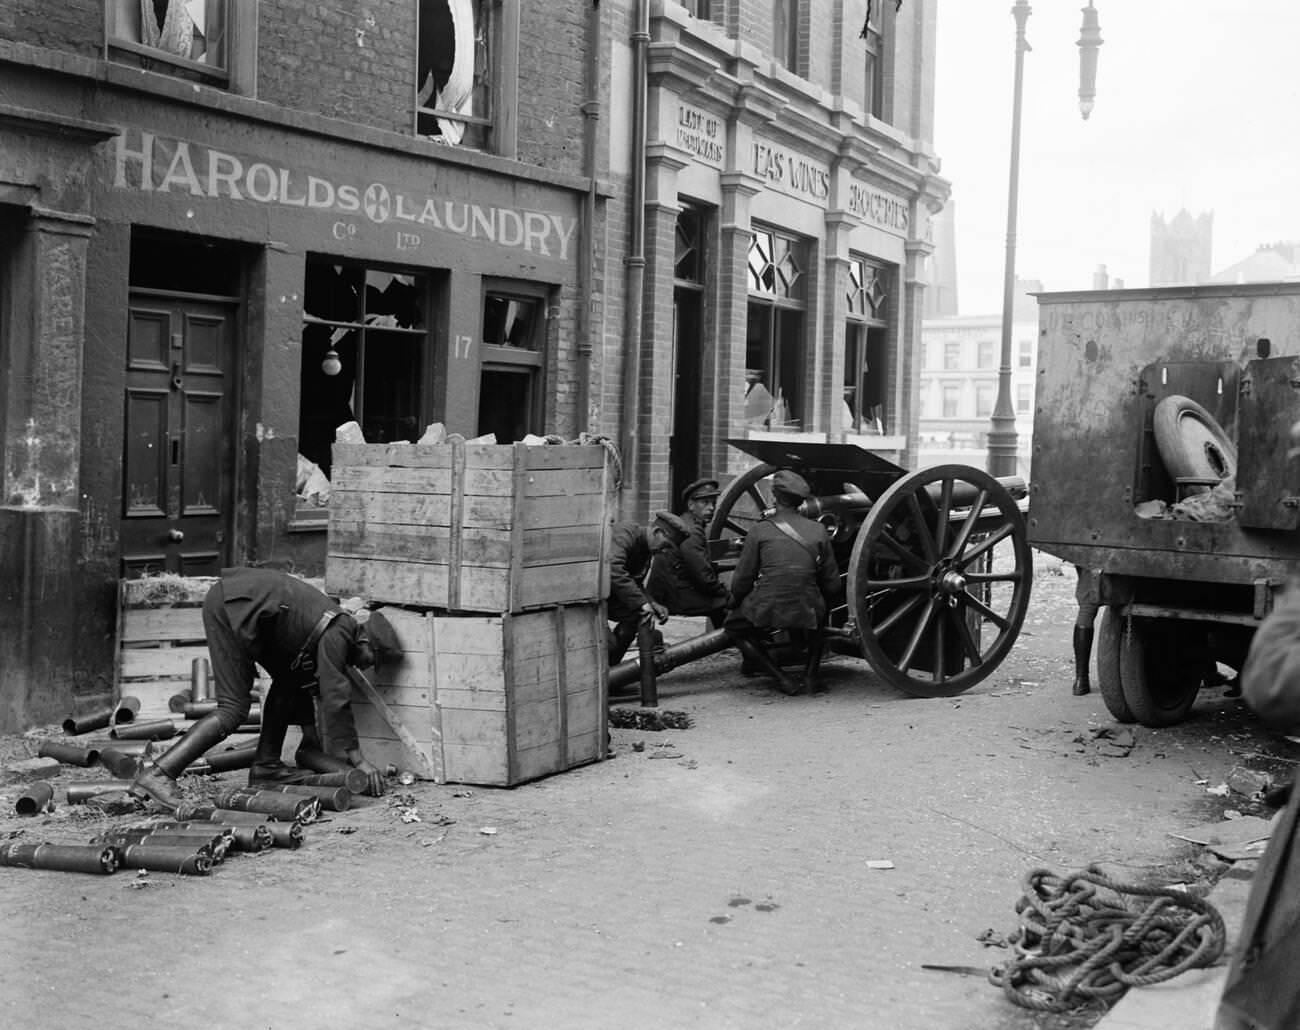 An Irish Free State 18 pounder gun bombarding the Four Courts before the capture, 1922.